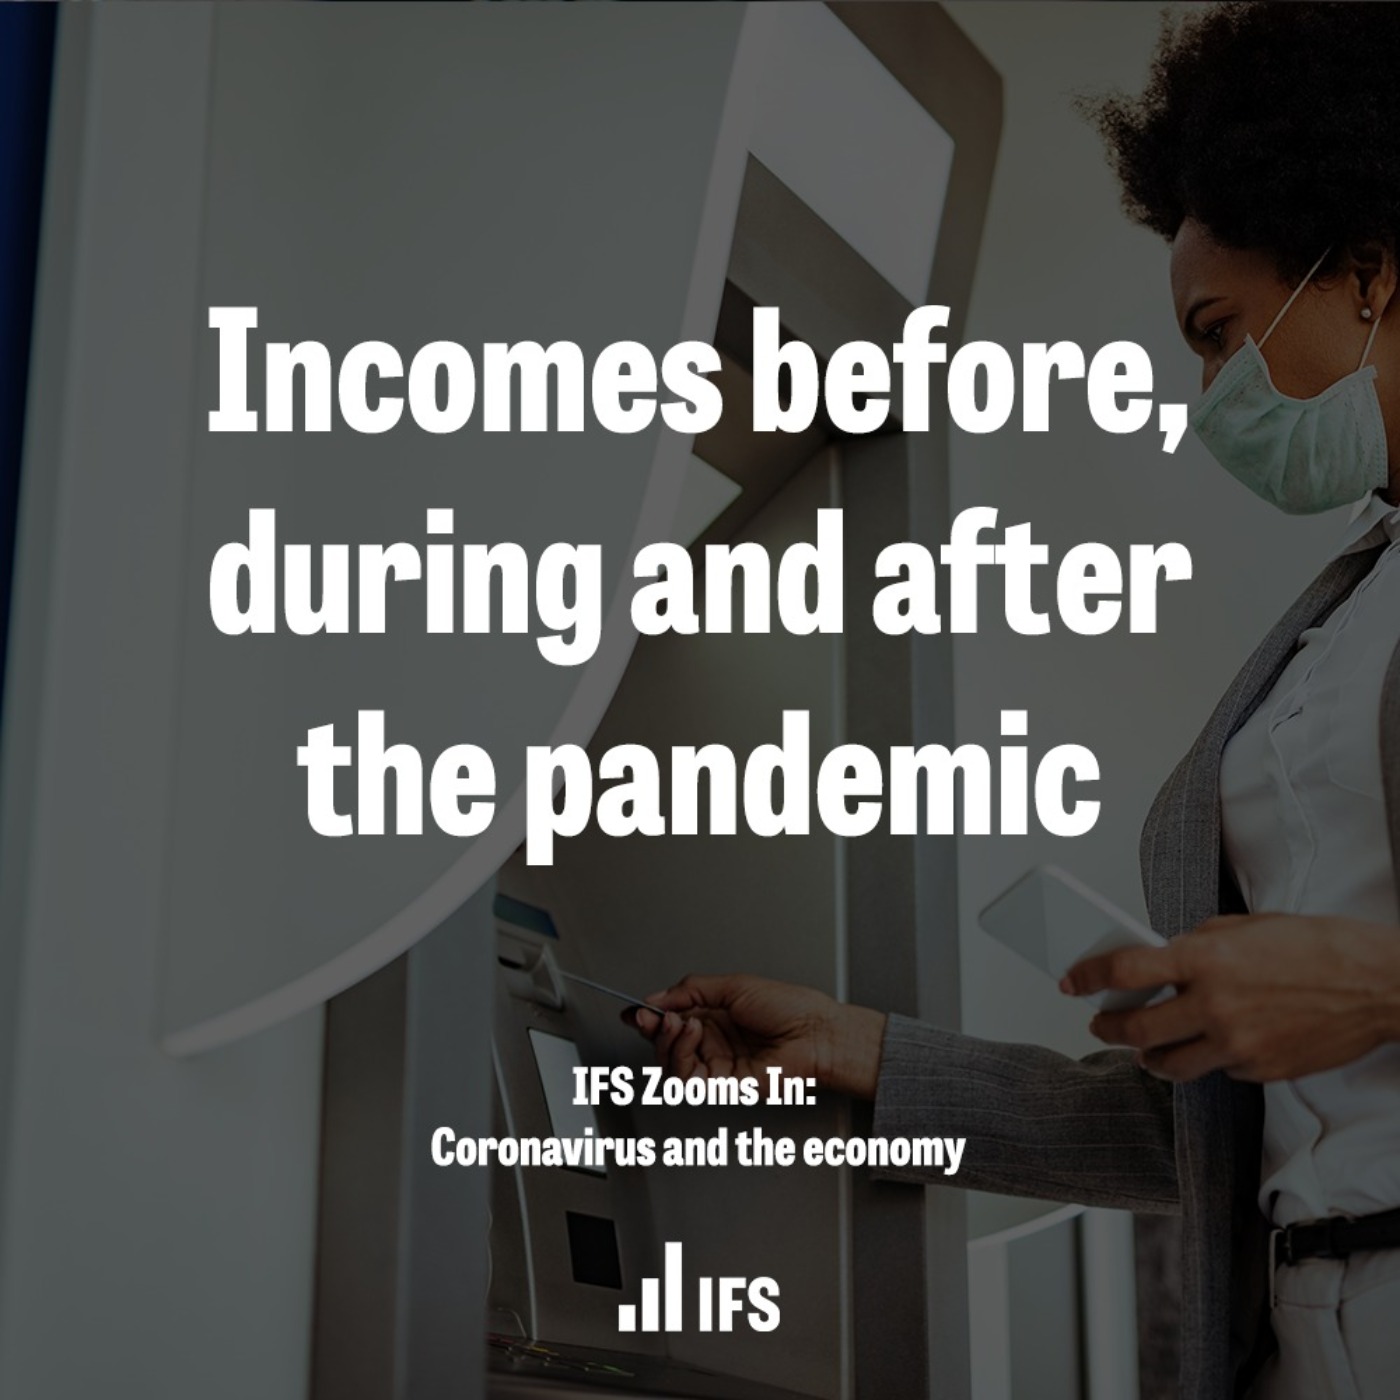 Incomes before, during and after the pandemic